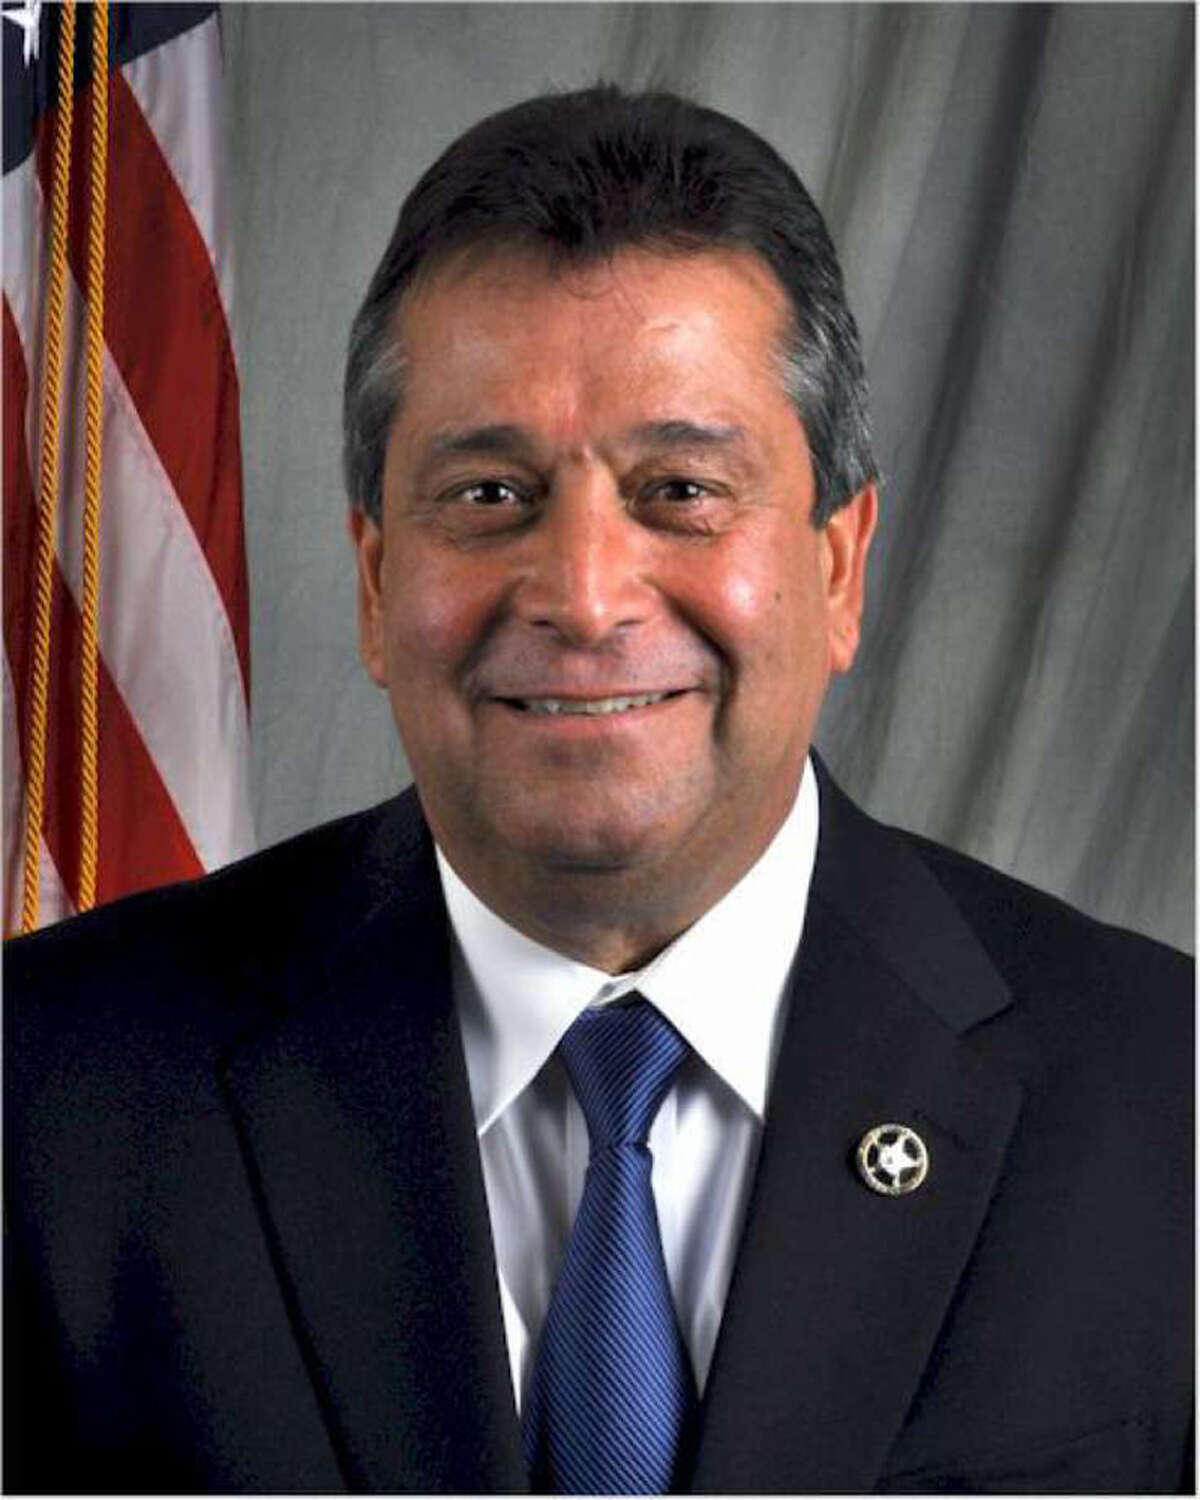 Robert Almonte is United States marshal for the Western District of Texas.